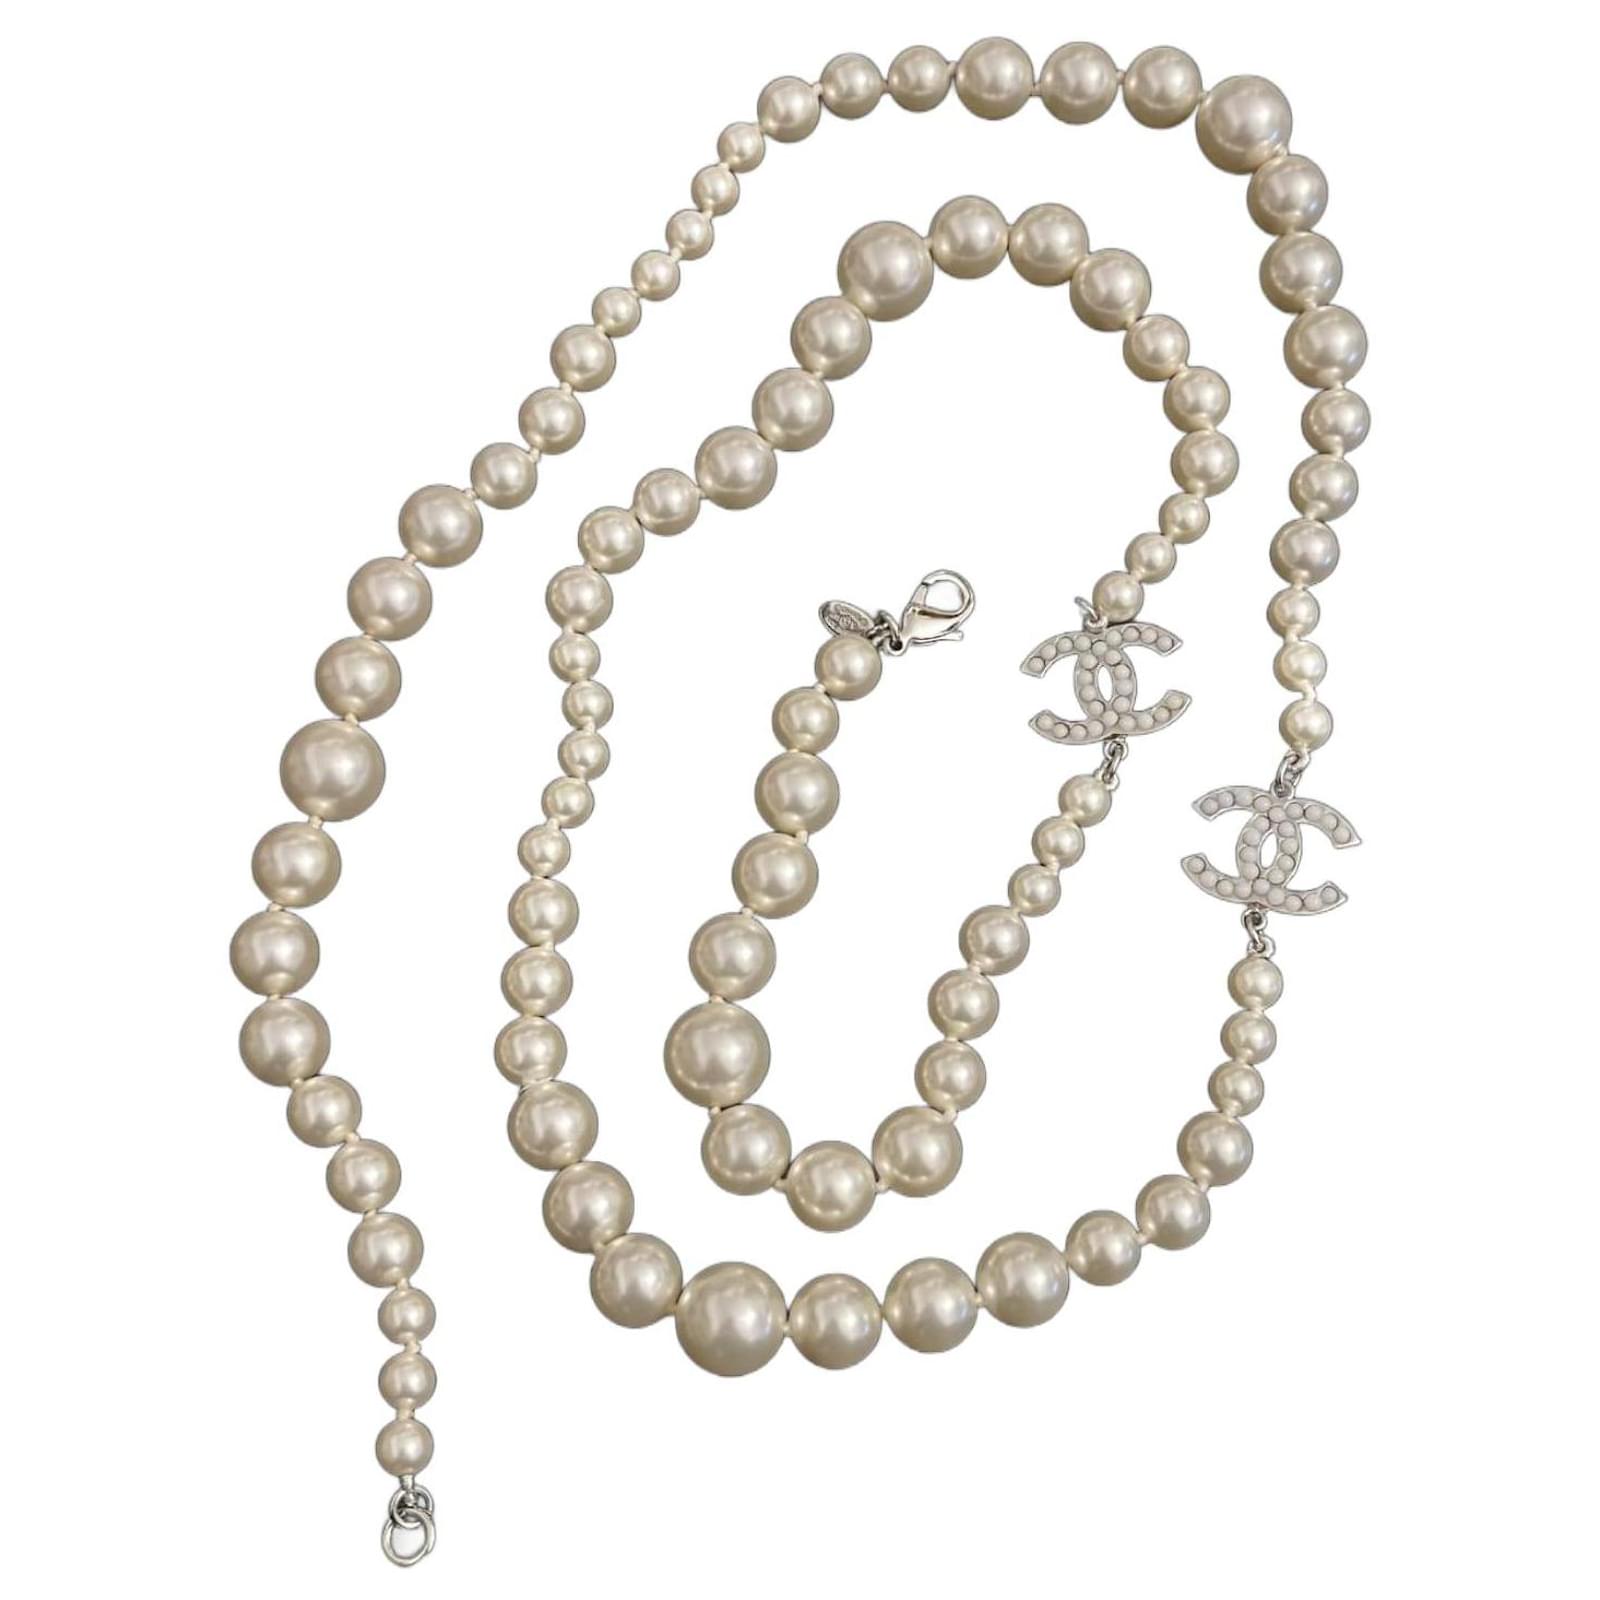 Repurposed Chanel Necklace Real Freshwater Pearl Mix - Dreamized